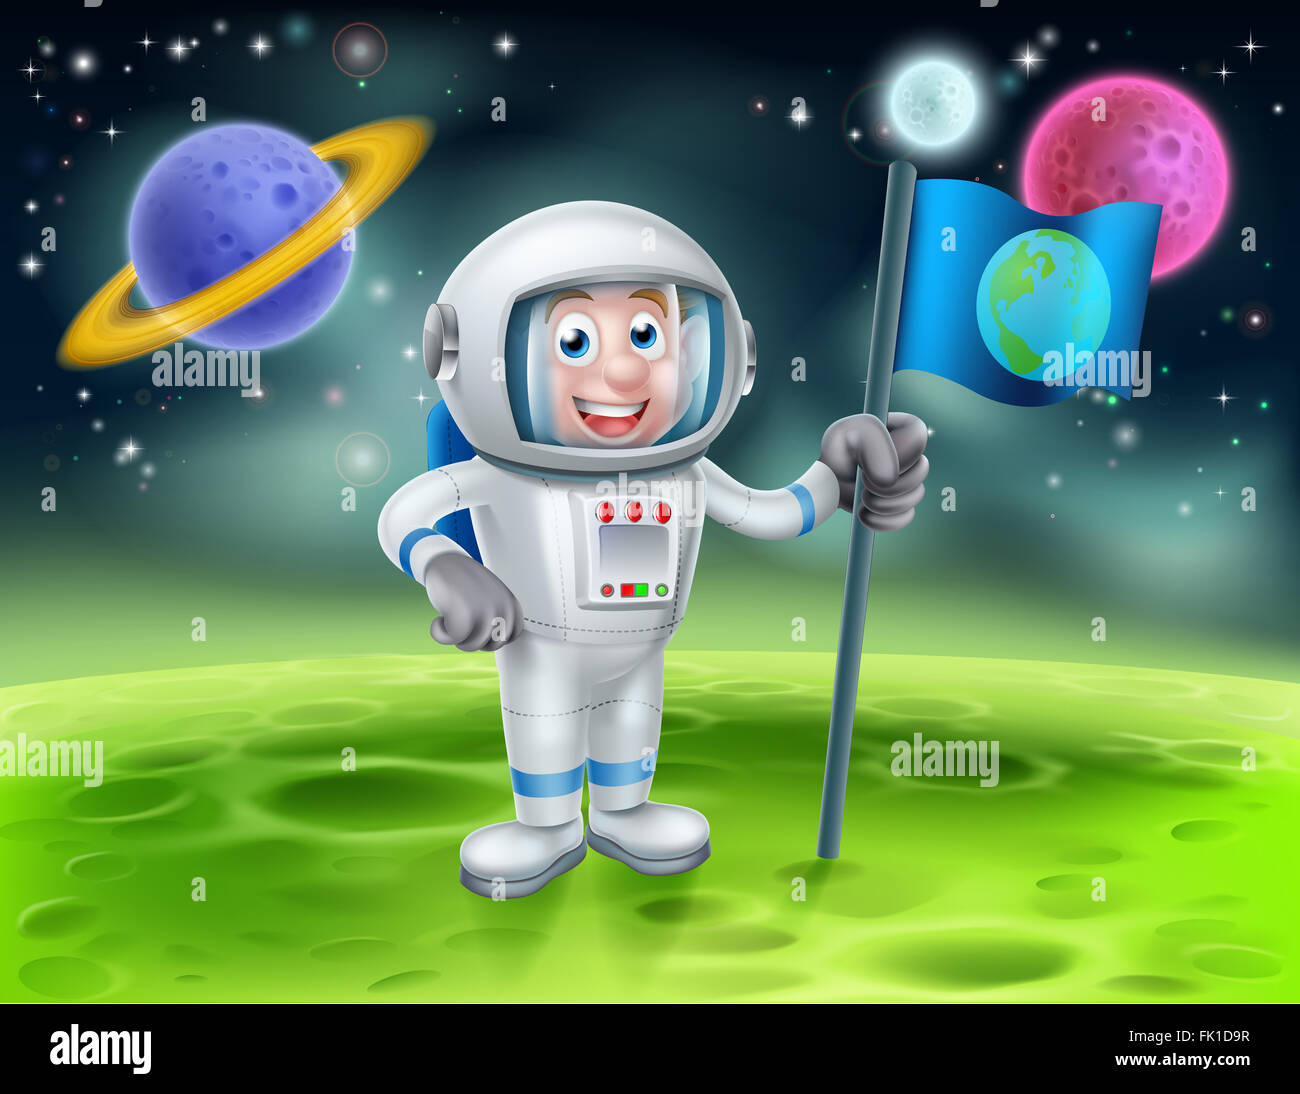 An illustration of a cartoon astronaut holding a flag on a moon or planet with alien planets in the background Stock Photo